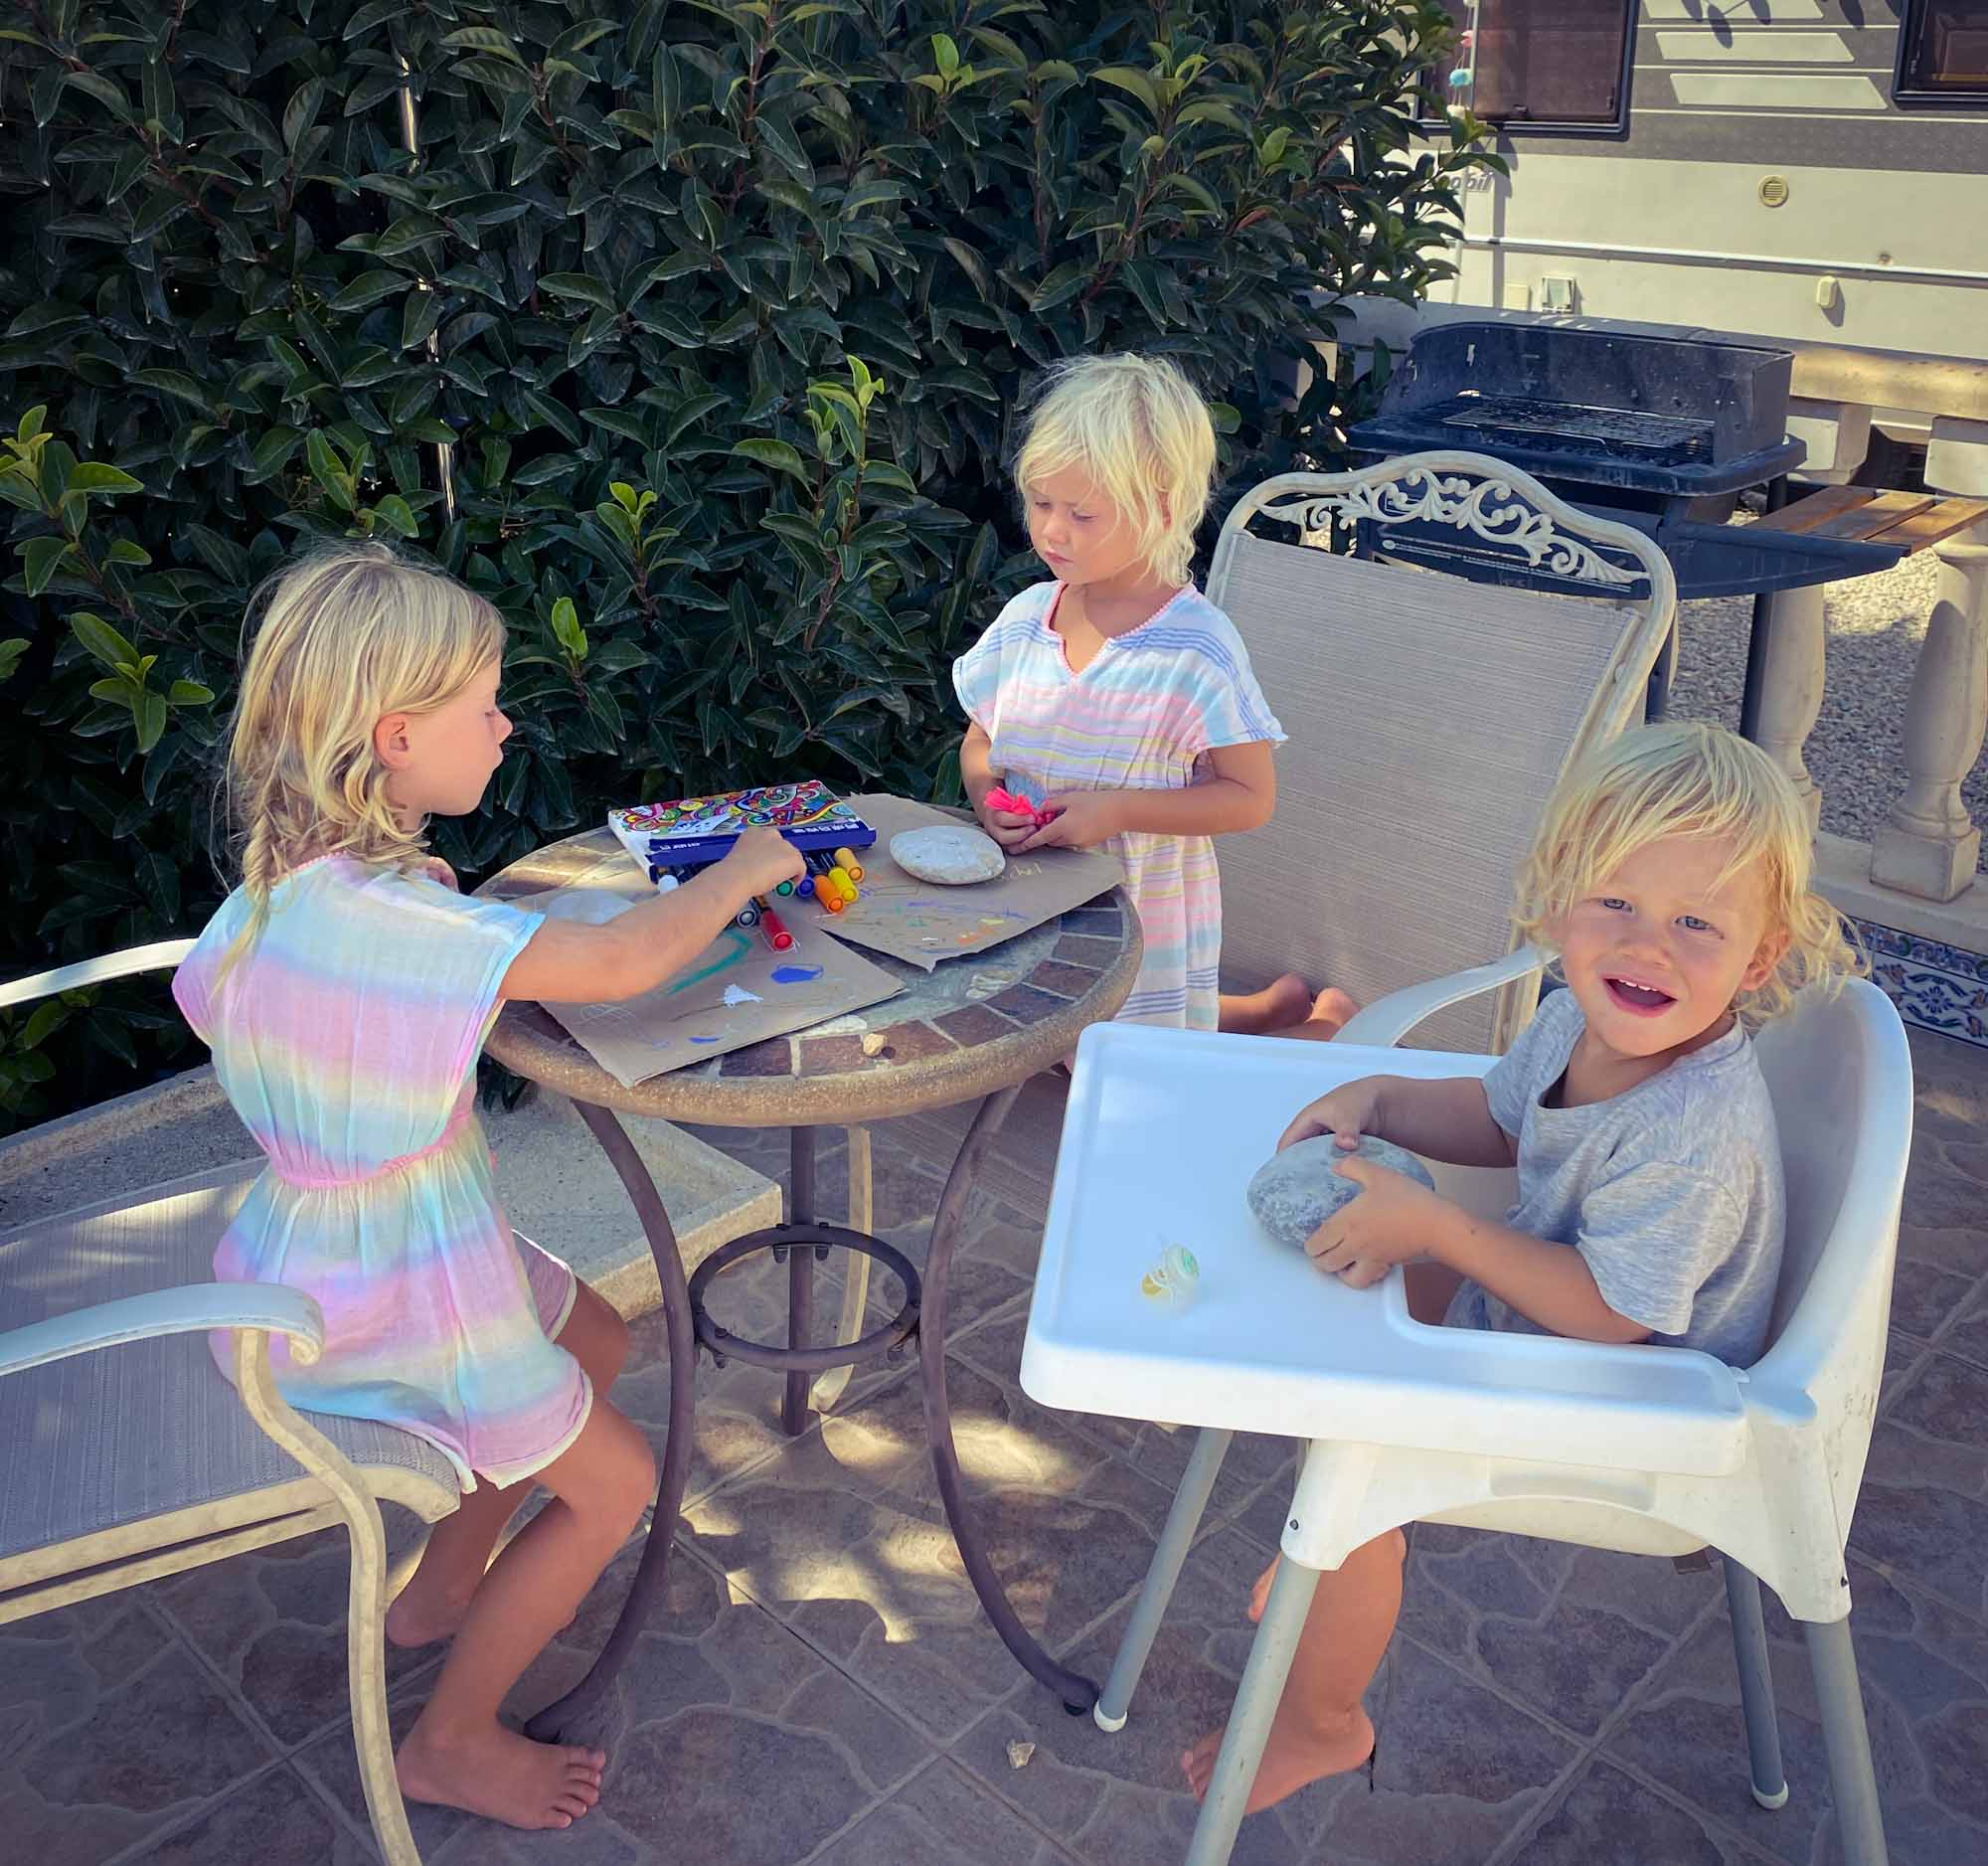 3 children sat at an outside garden table, painting stones with paint pens